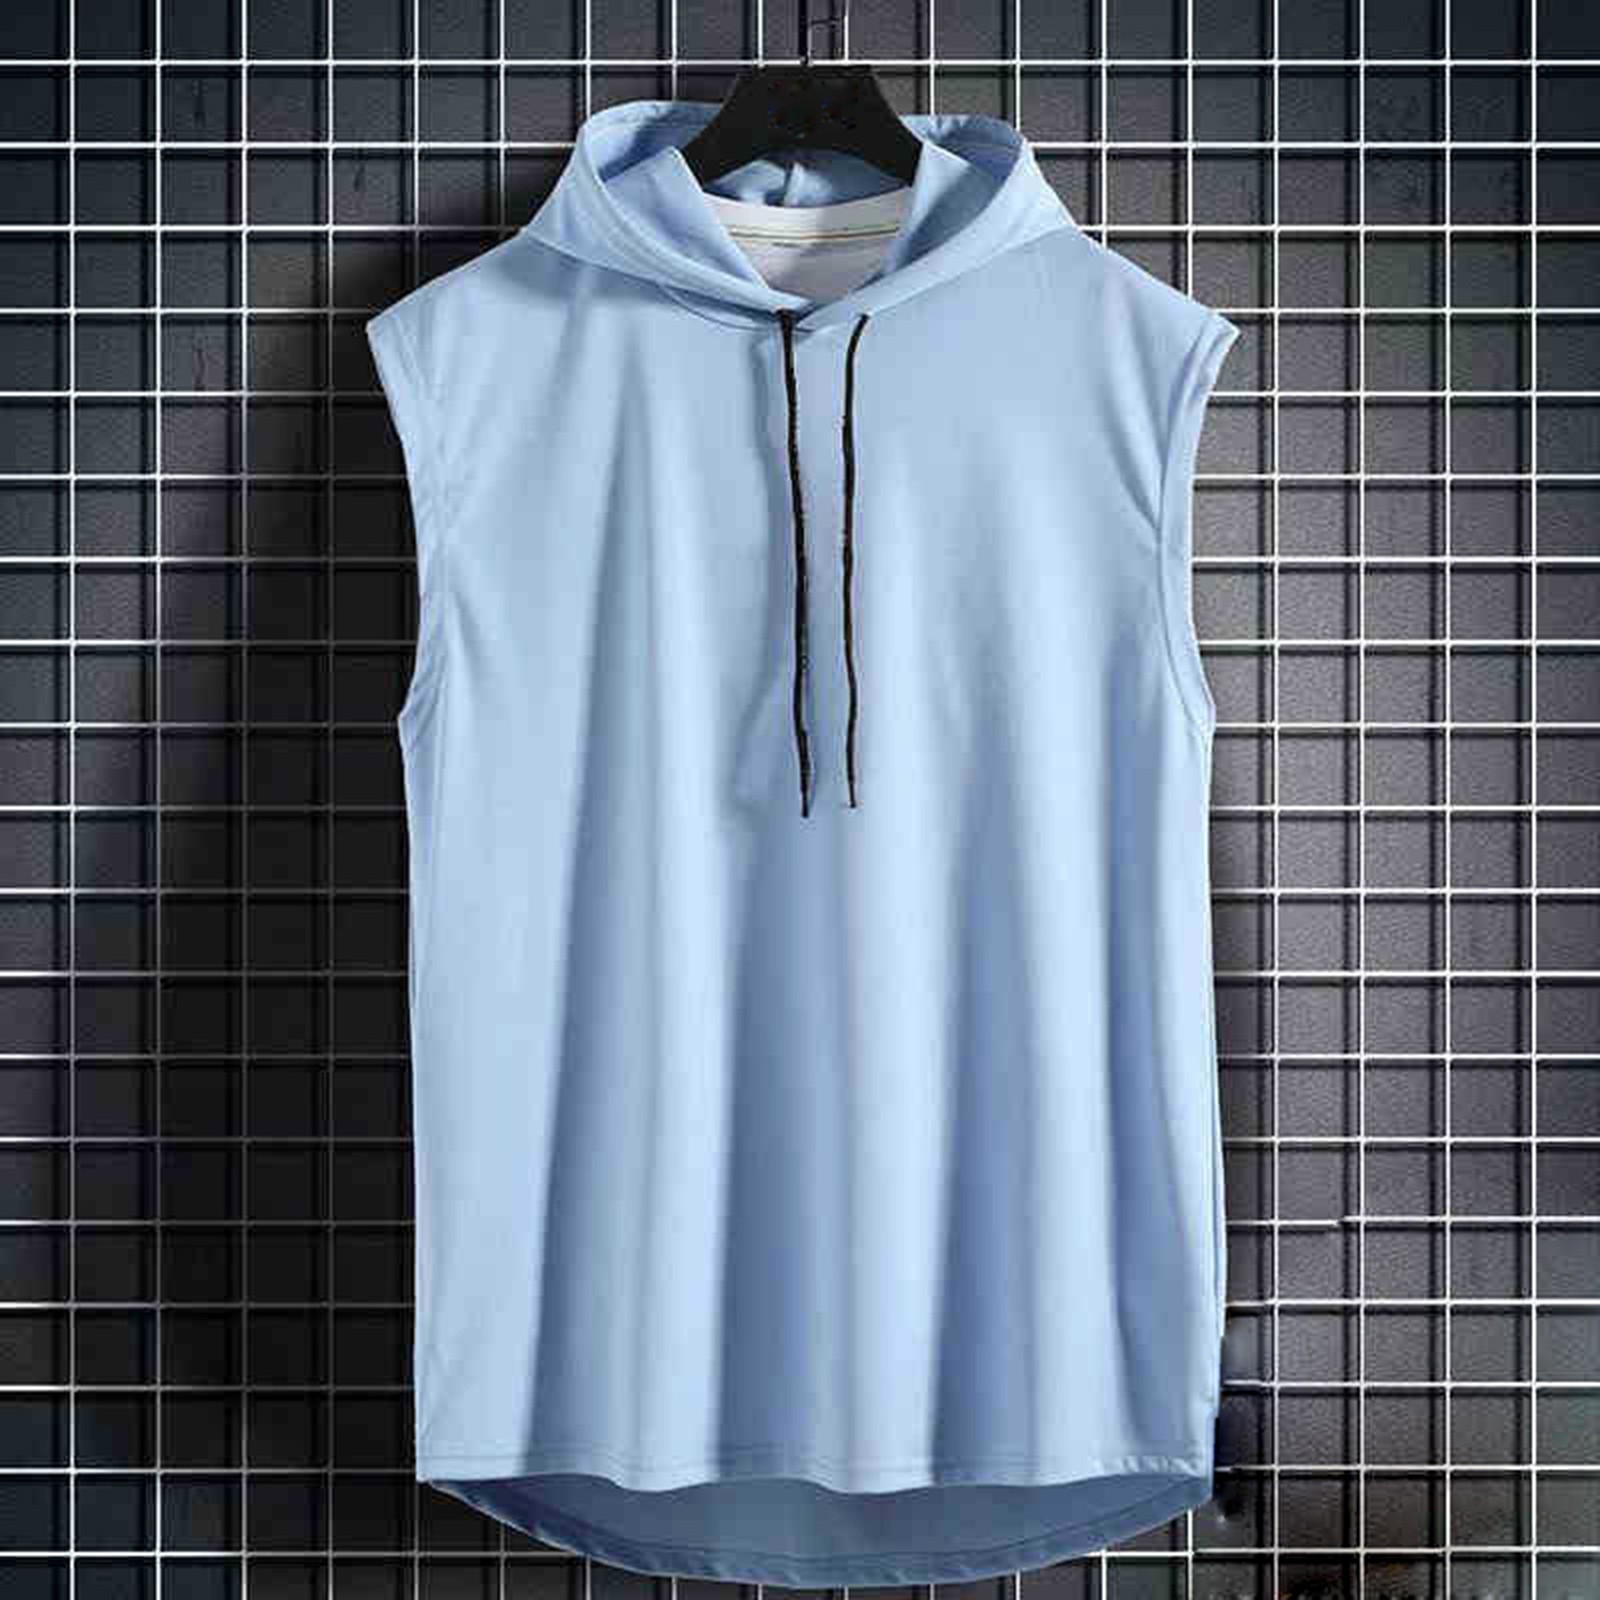 WUWUQF Hoodies Mens Sleeveless Vest Top Casual T-Shirt Solid Color ...